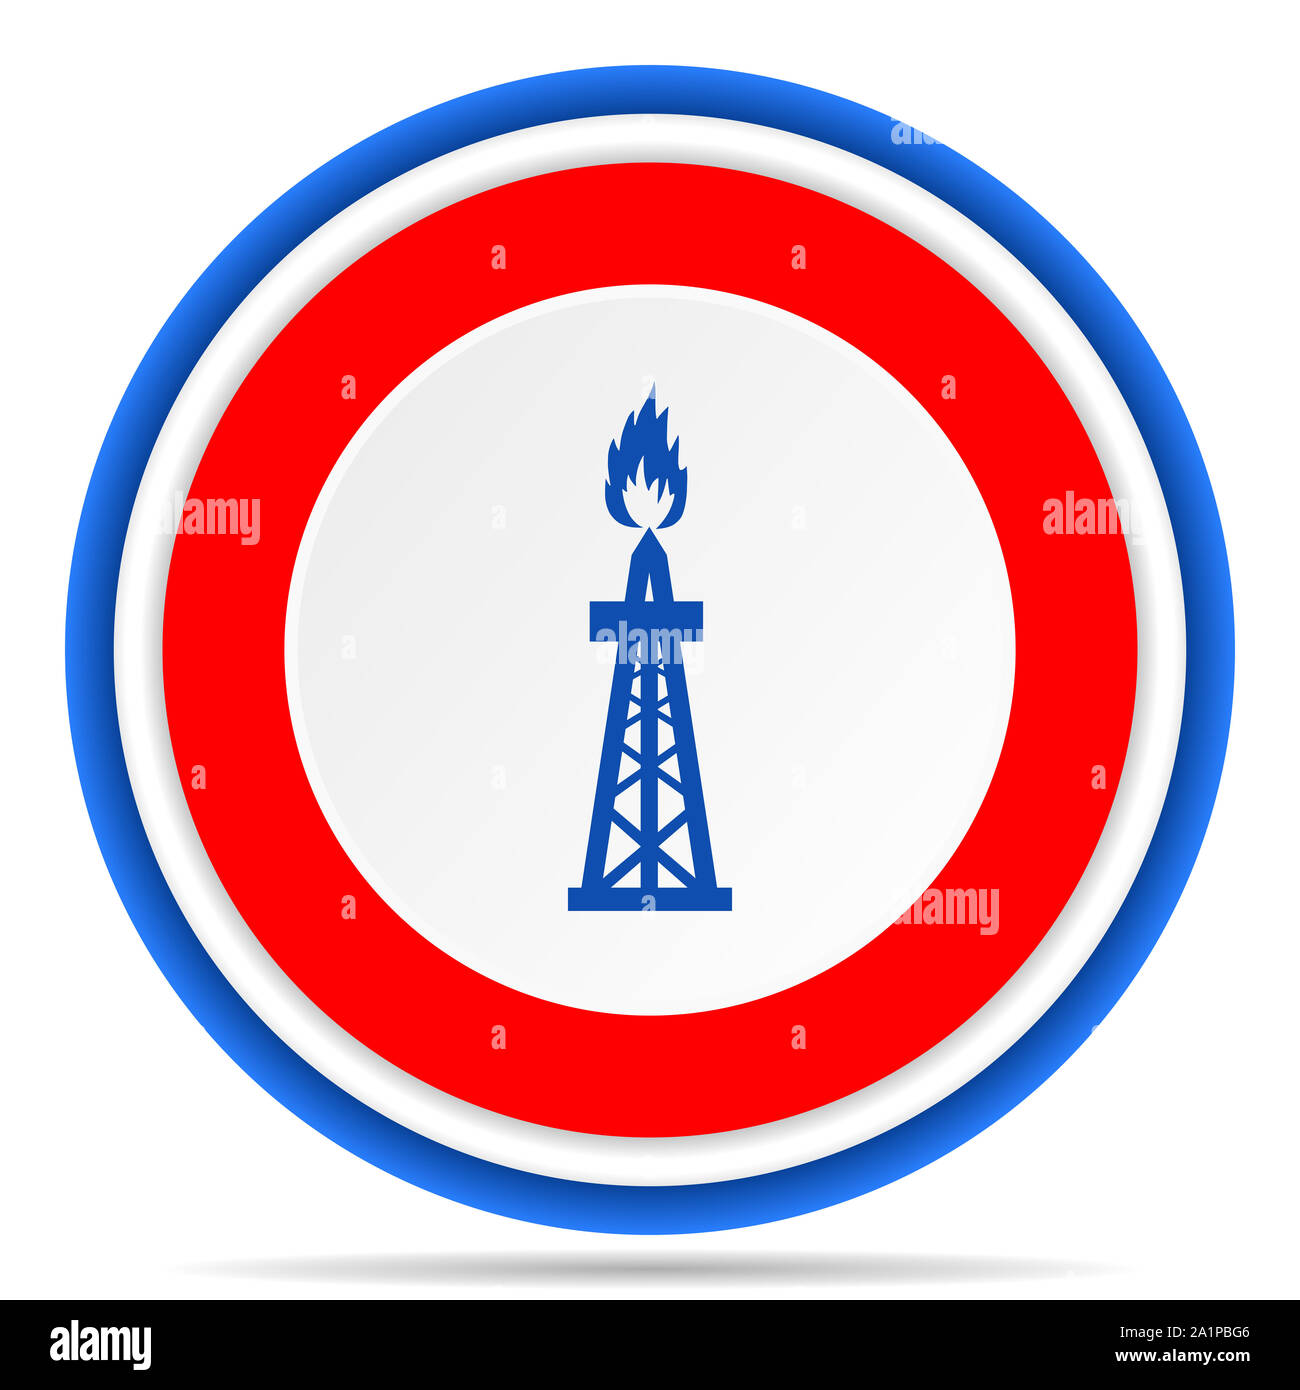 Gas round icon, red, blue and white french design illustration for web, internet and mobile applications Stock Photo